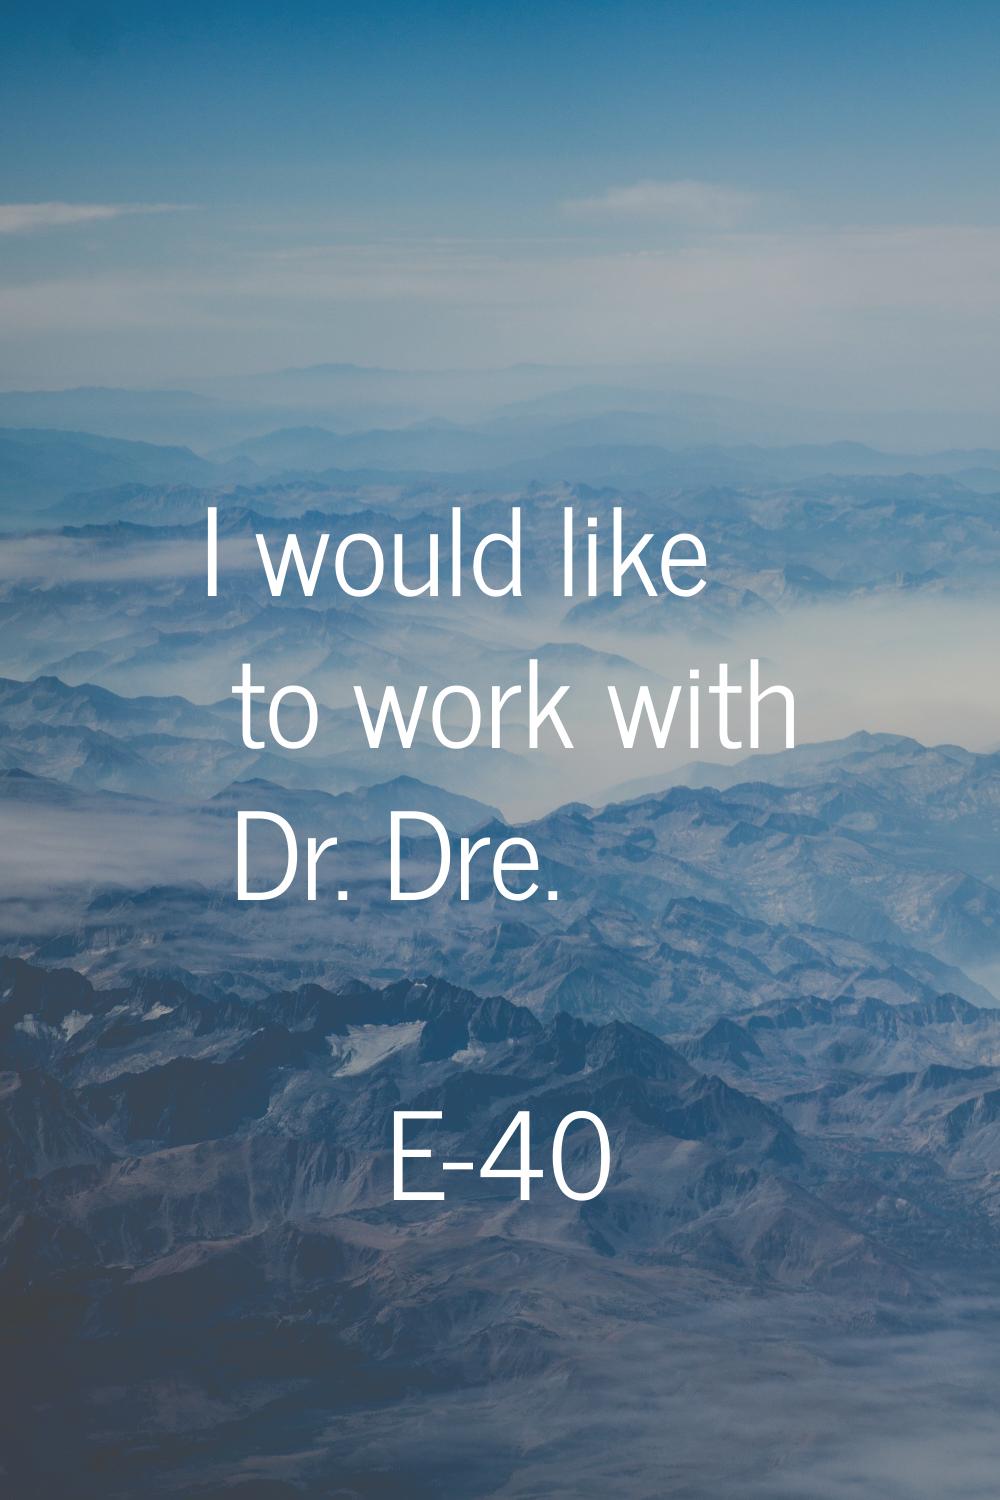 I would like to work with Dr. Dre.